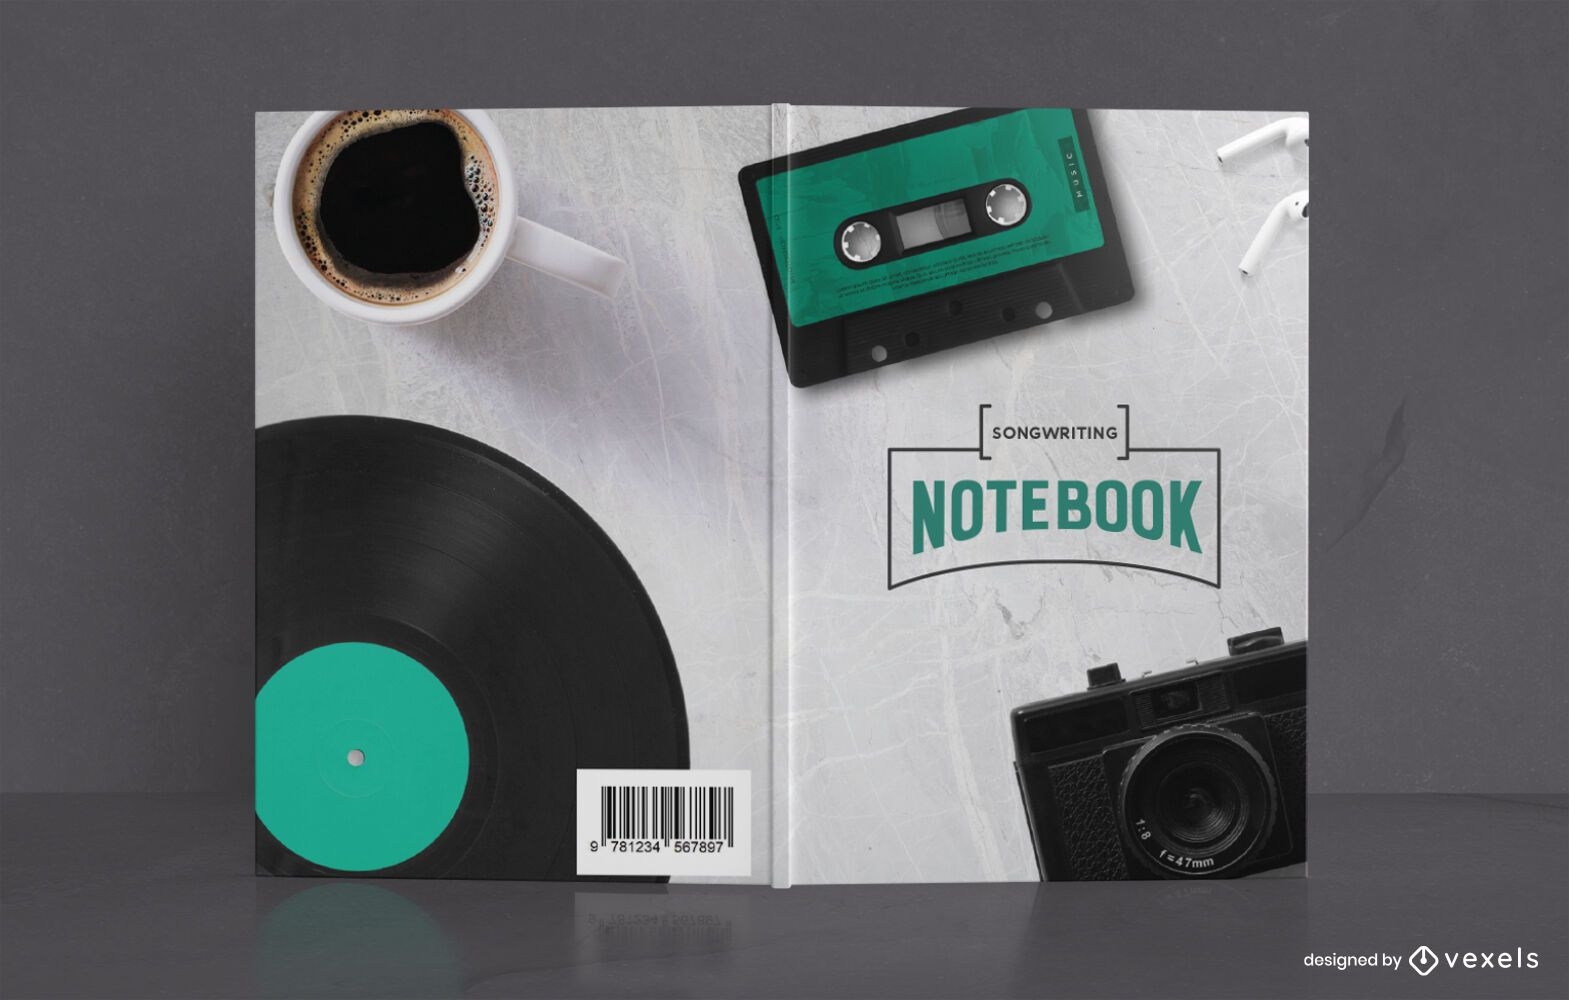 Songwriting Notebook Buchcover Design